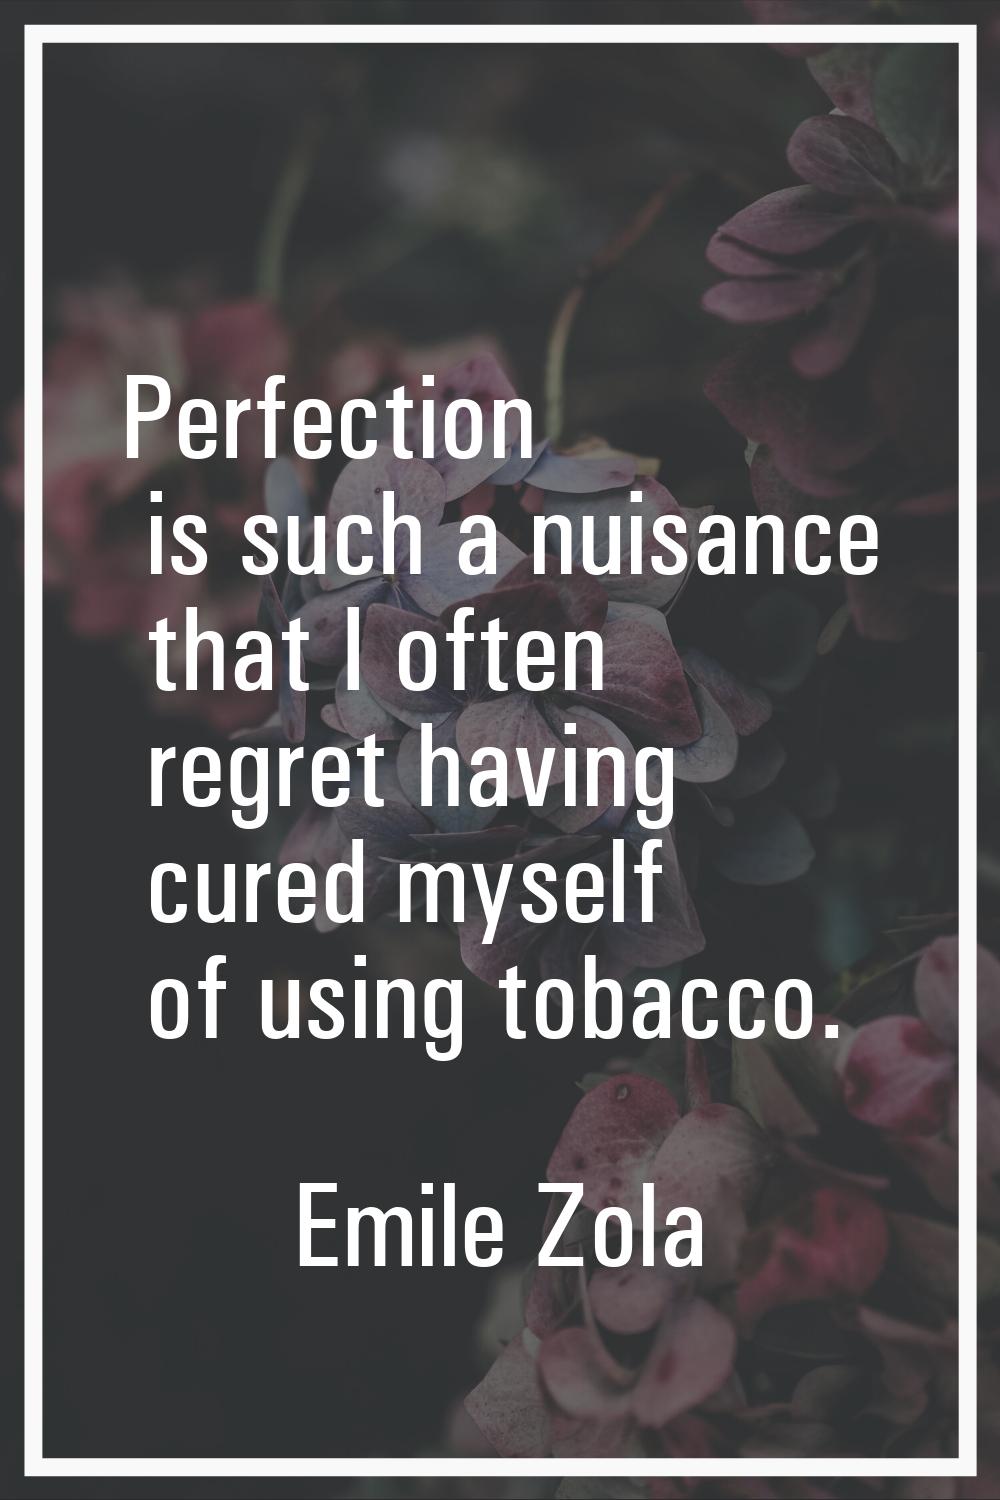 Perfection is such a nuisance that I often regret having cured myself of using tobacco.